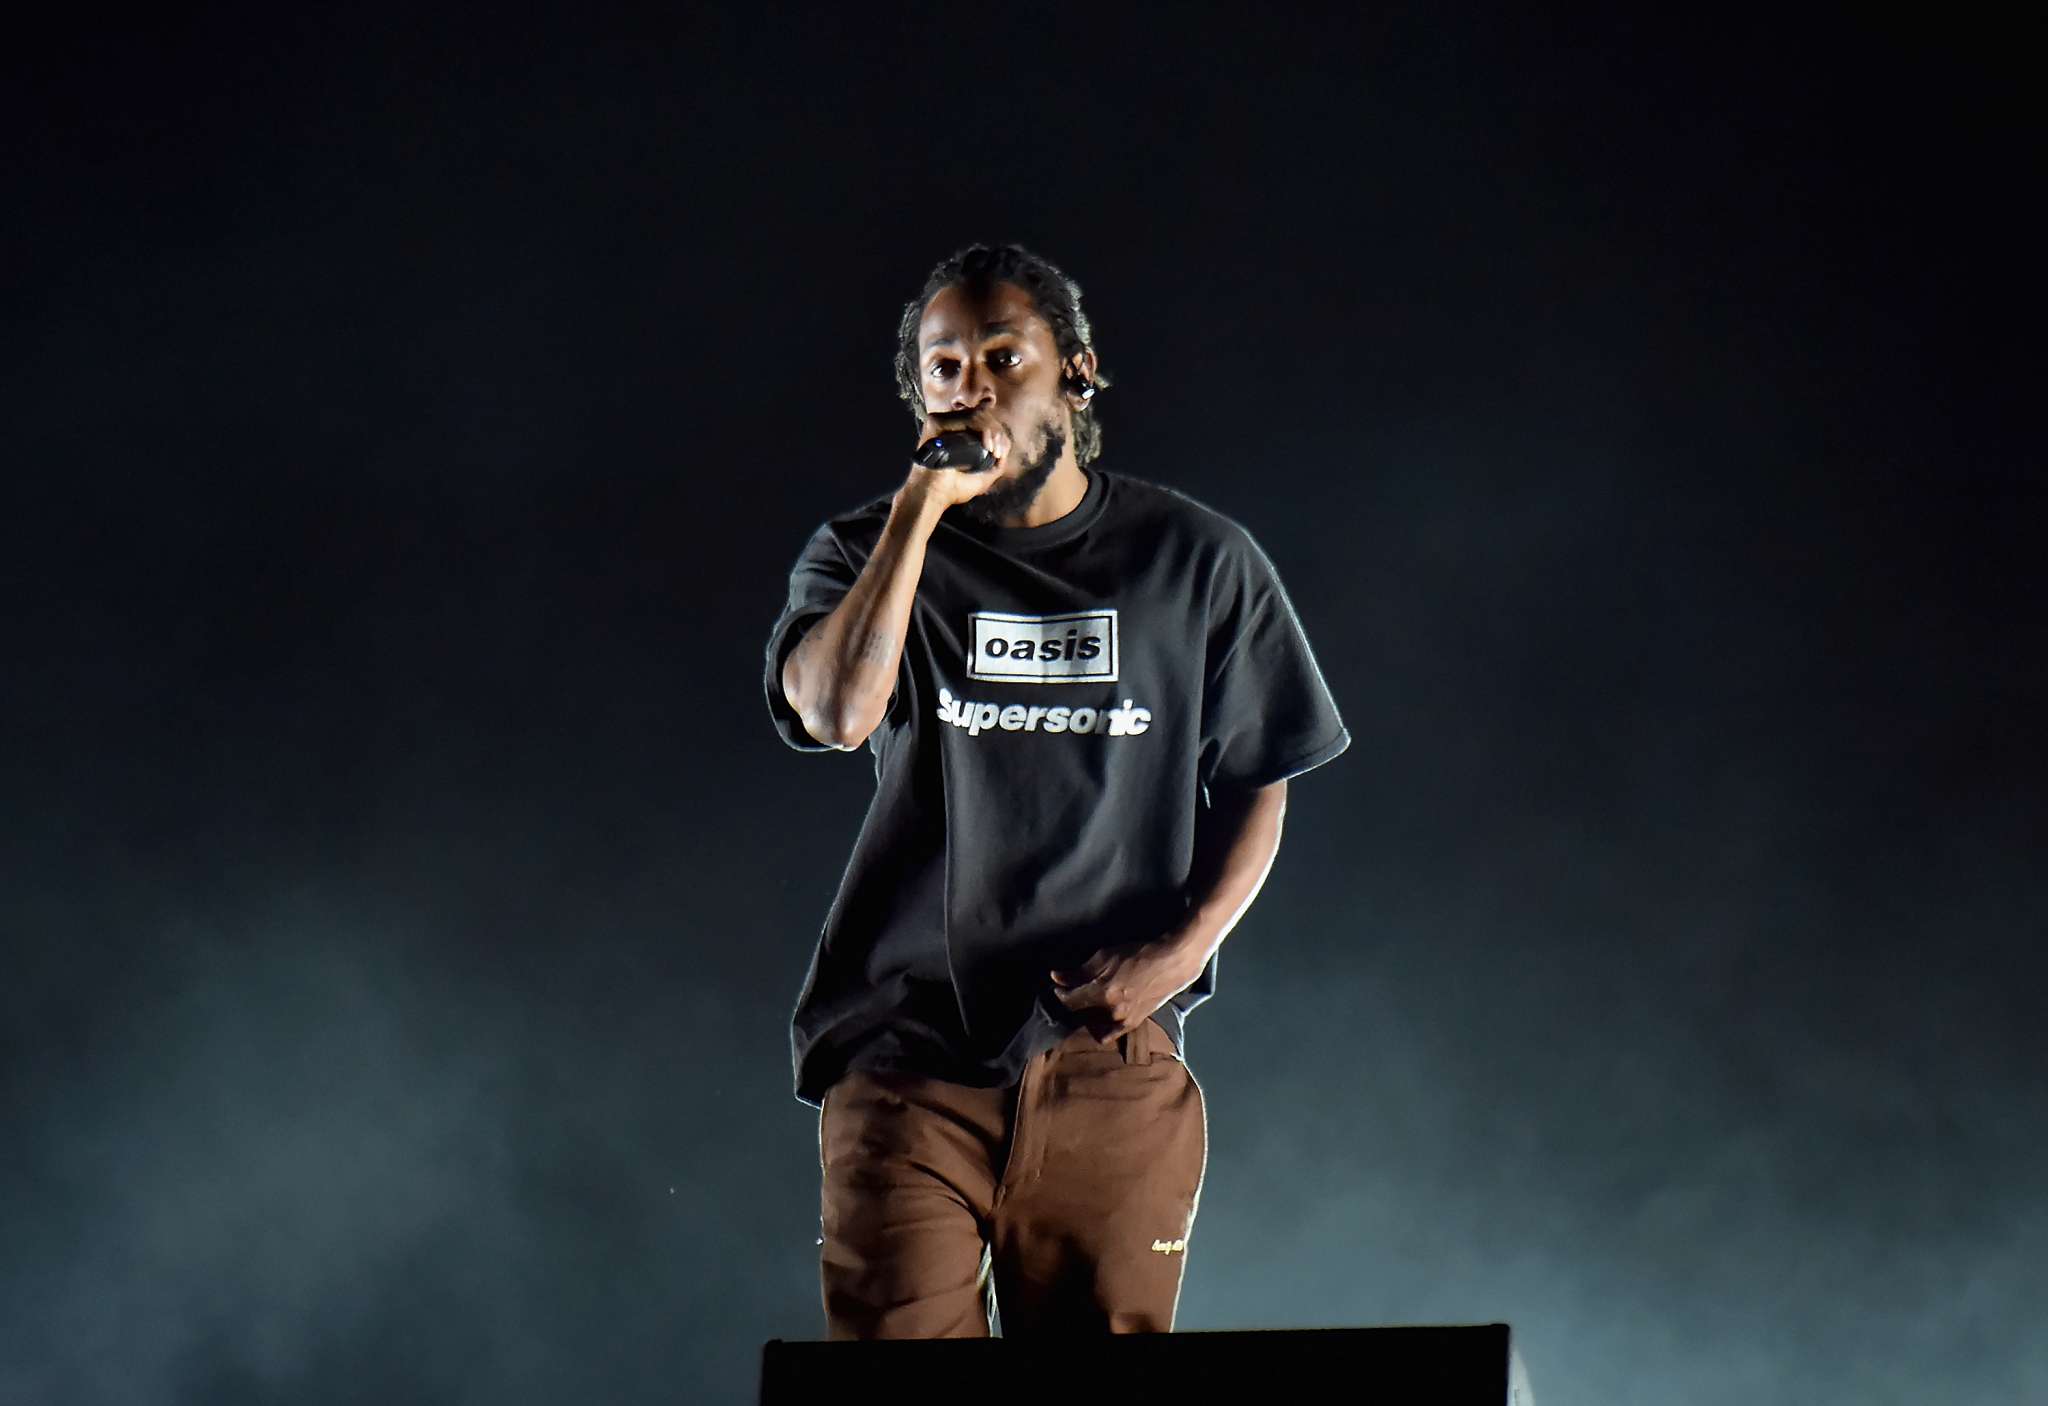 kendrick-lamar-is-back-with-his-first-album-in-5-years-mr-morale-the-big-steppers